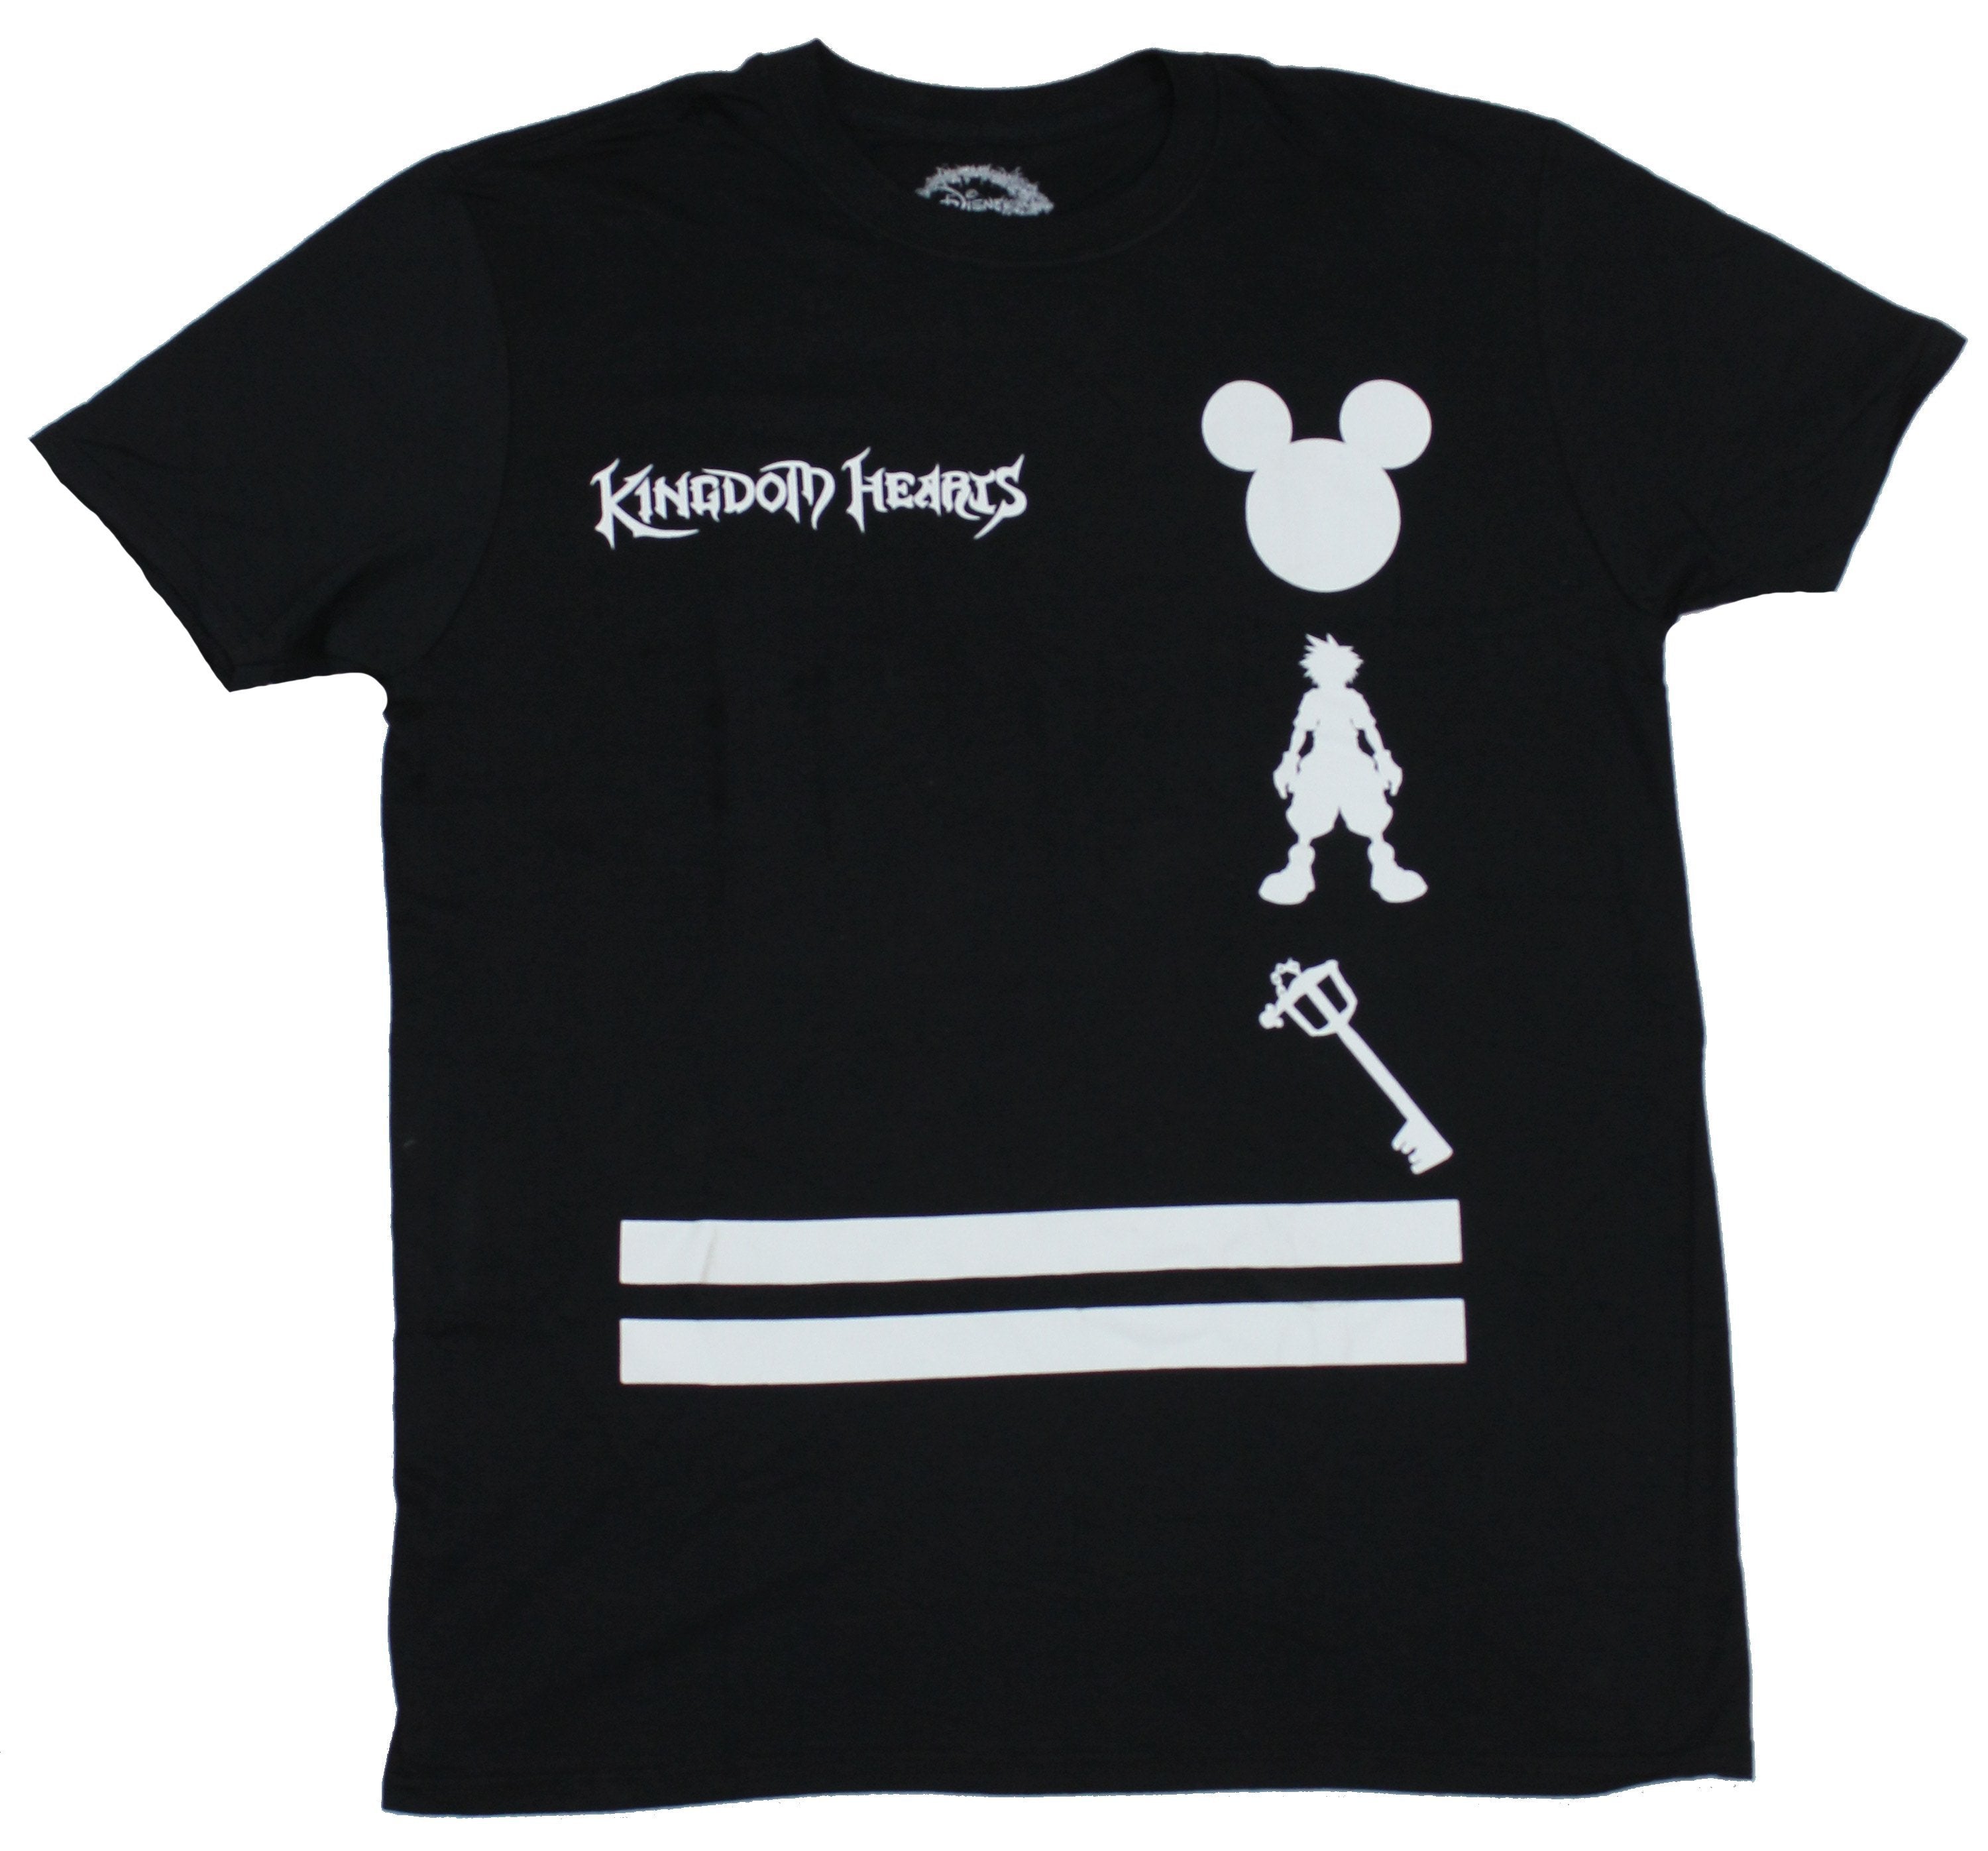 Kingdom Hearts Mens T-Shirt - Black And White Game Silhouette Images